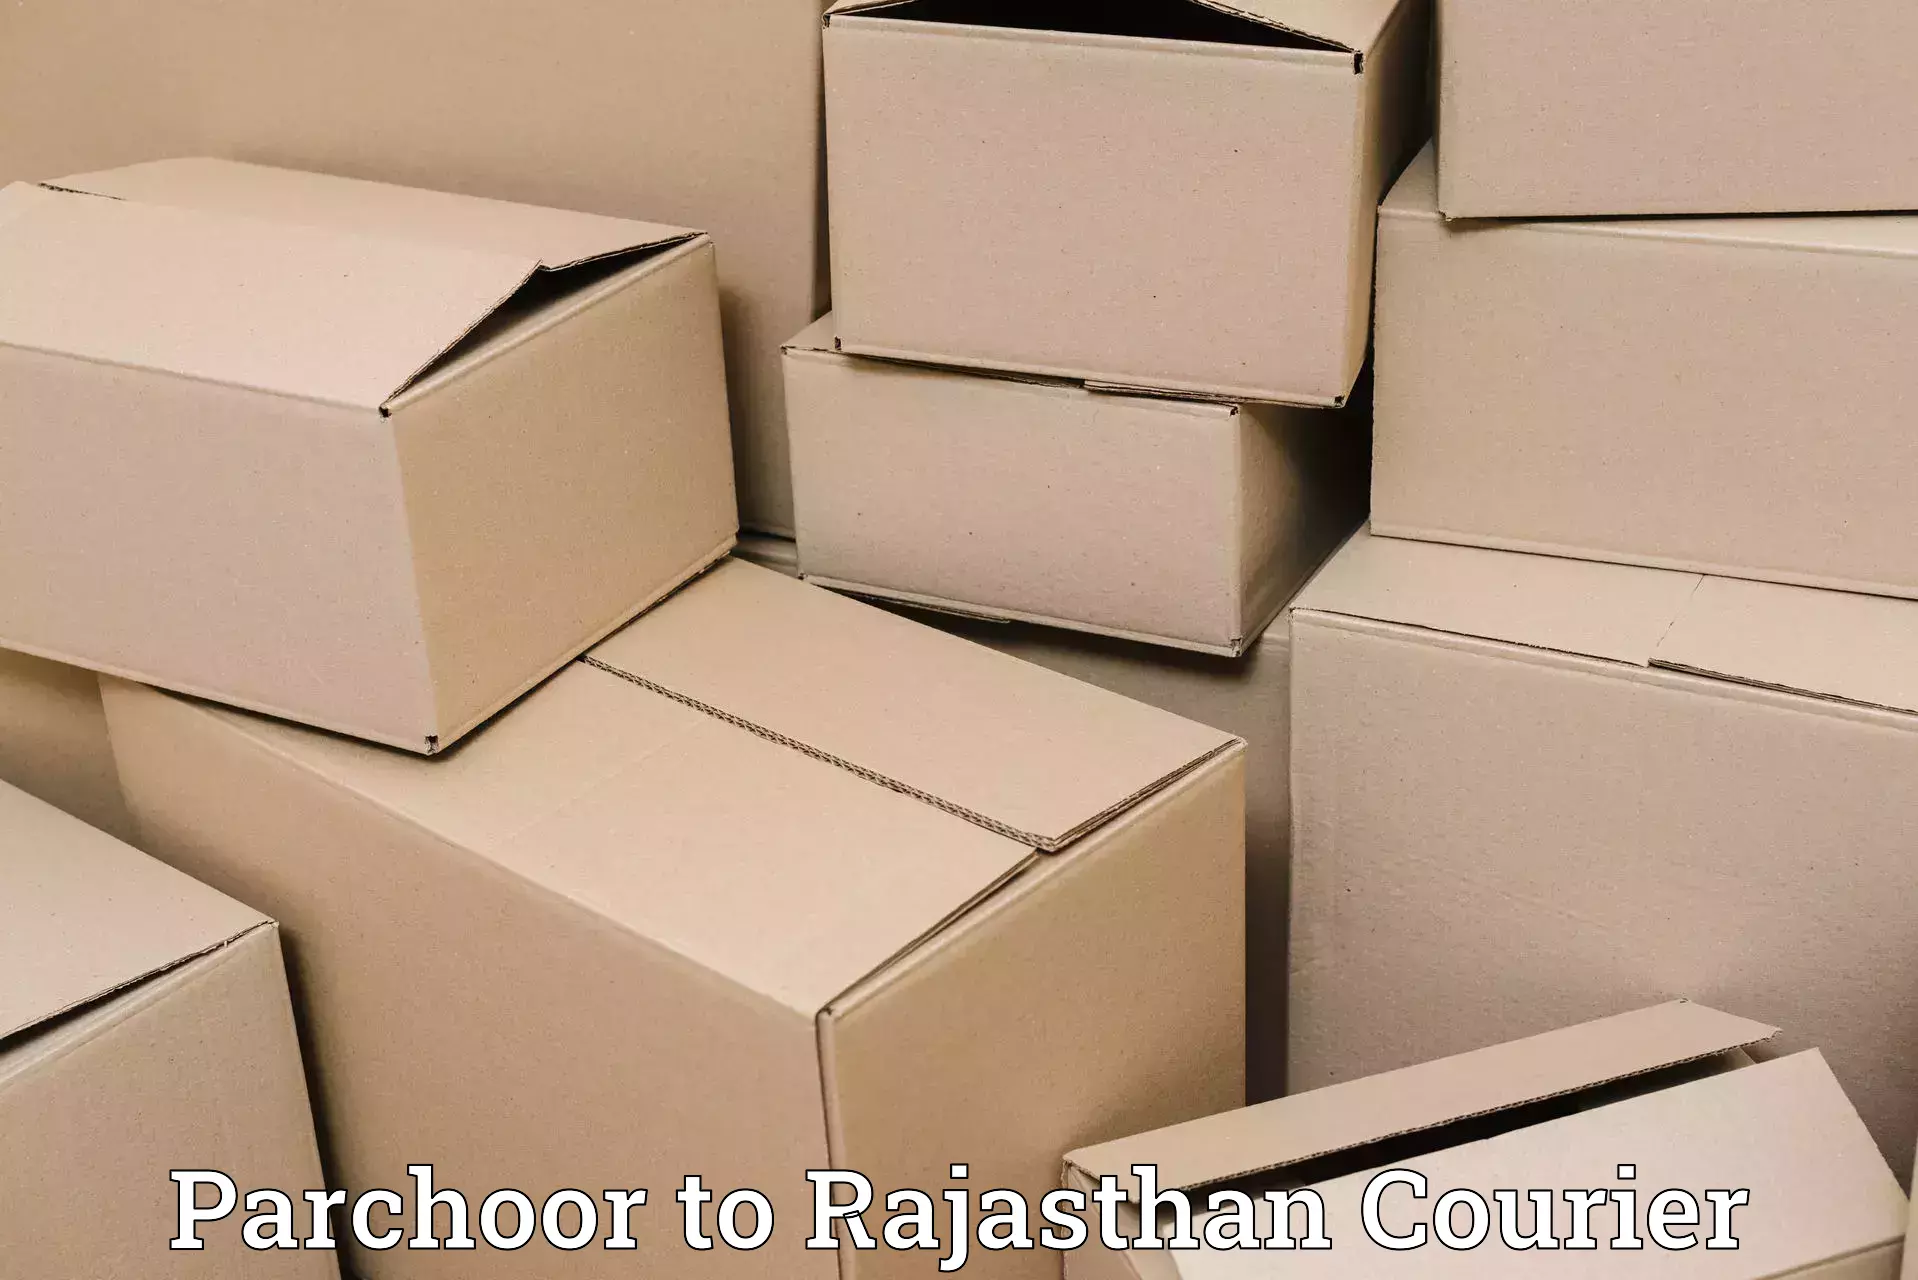 Round-the-clock parcel delivery Parchoor to Ajmer